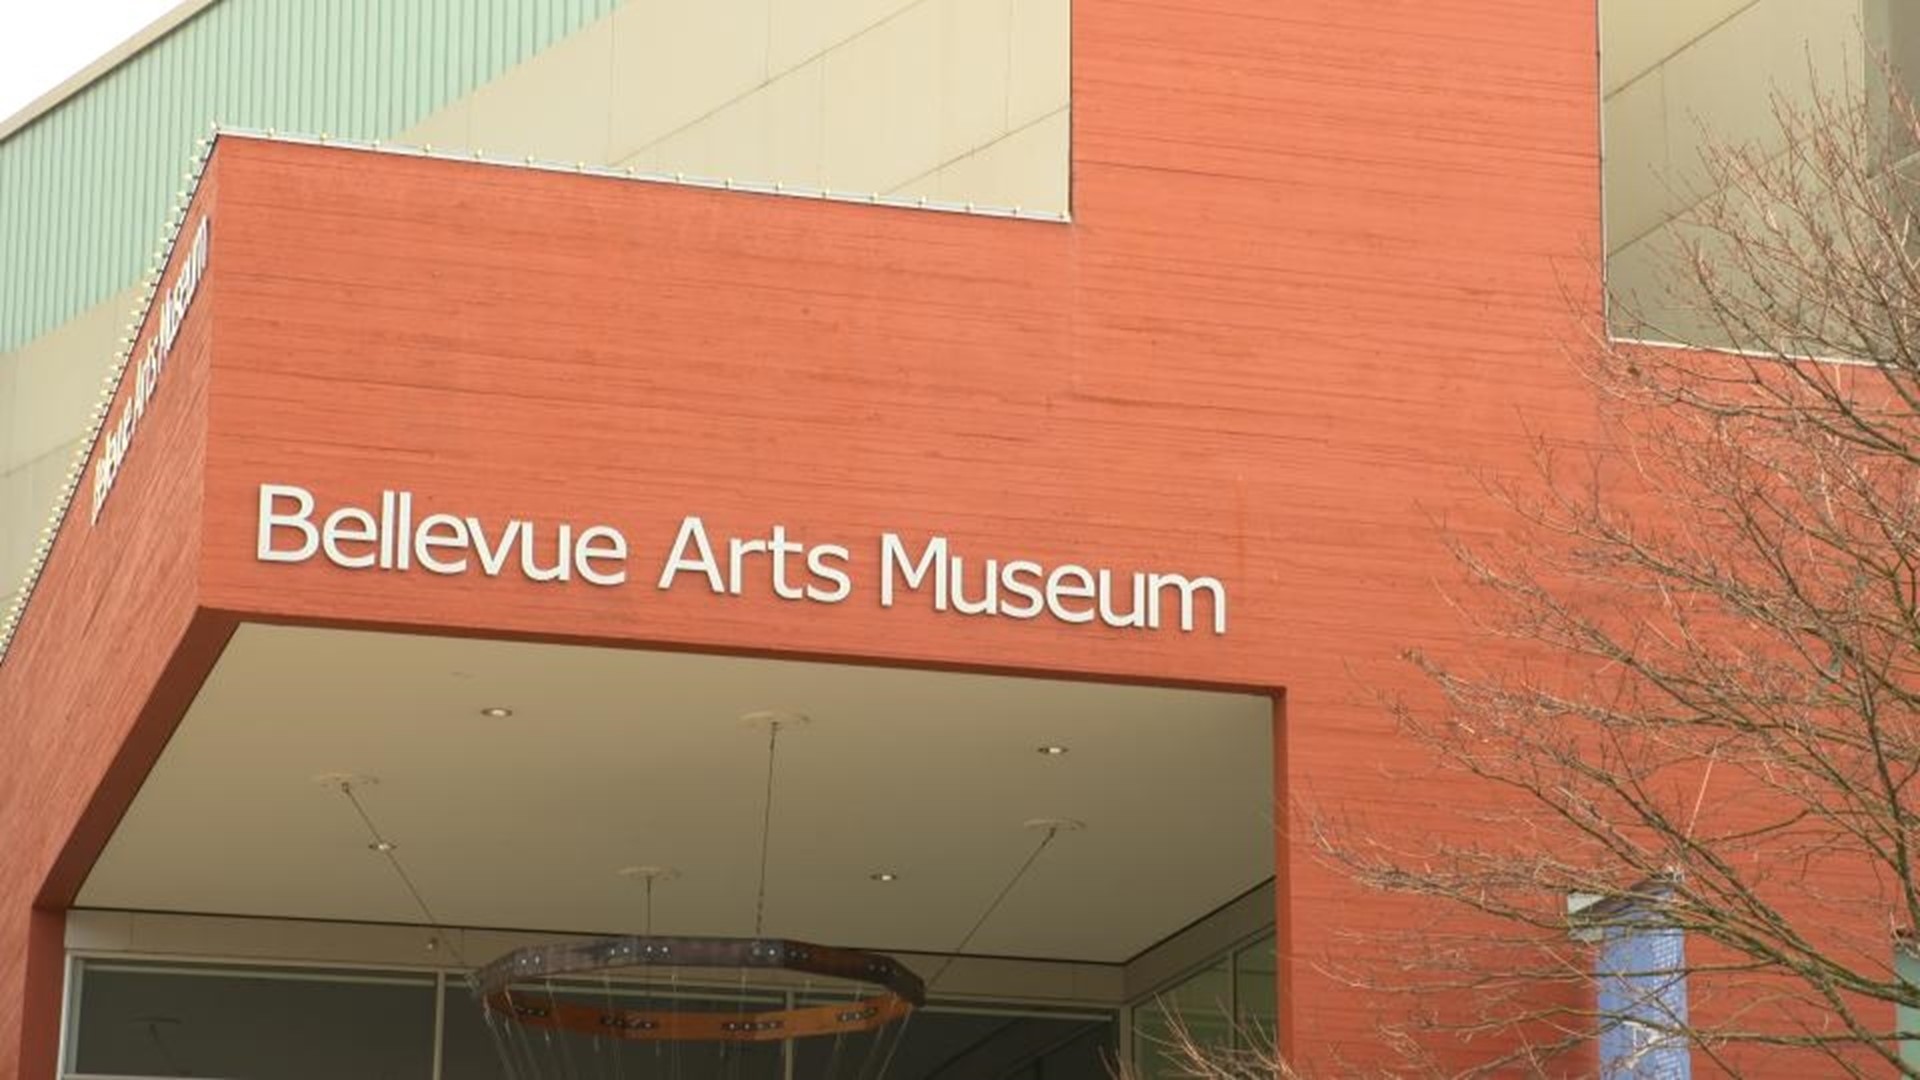 The museum's short-term fundraiser has been largely successful. But will it be enough to secure its future? #k5evening